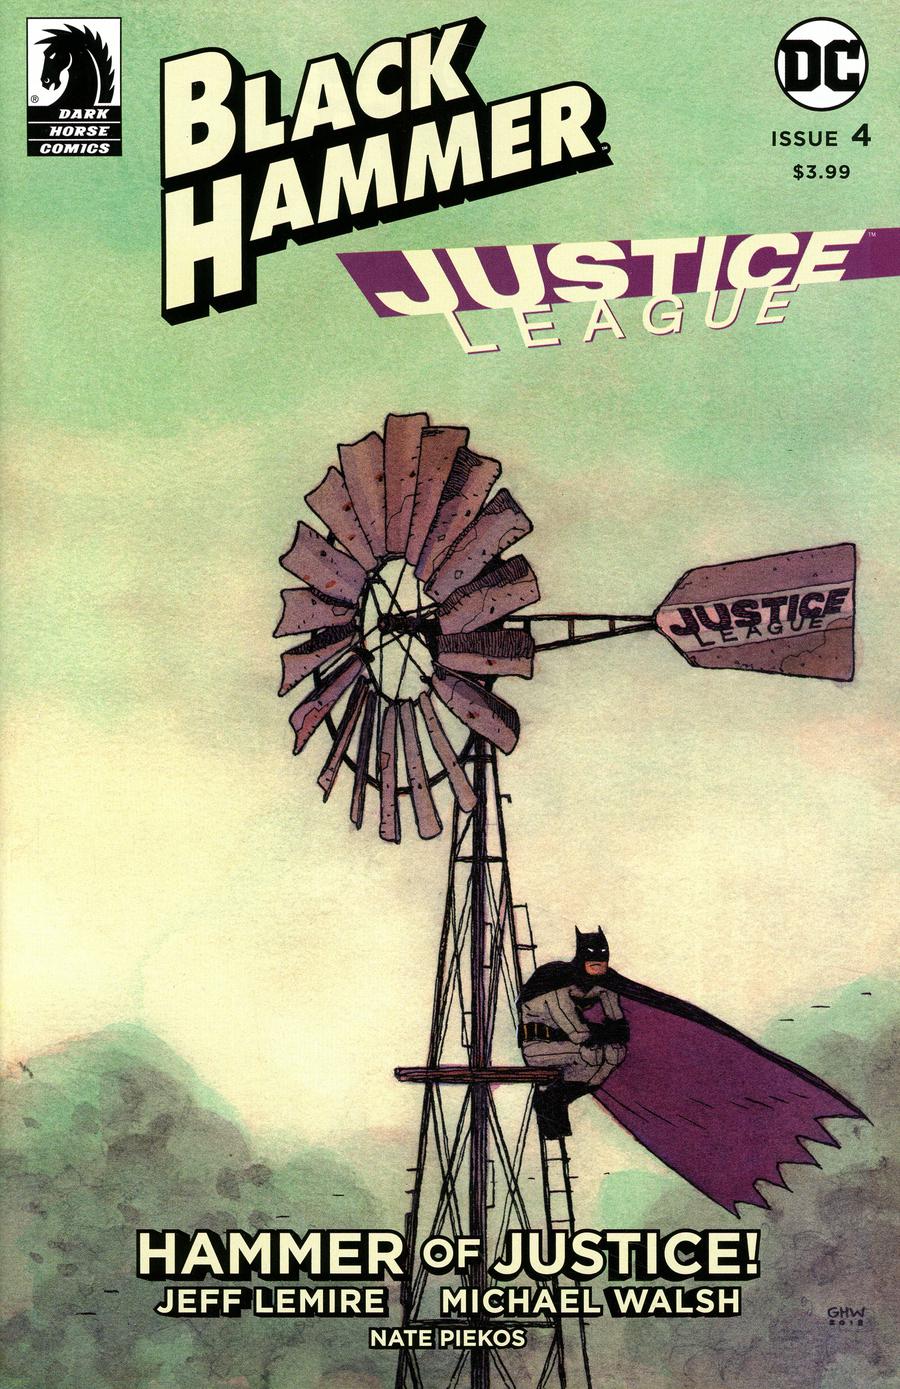 Black Hammer Justice League #4 Cover D Walta (Of 5)